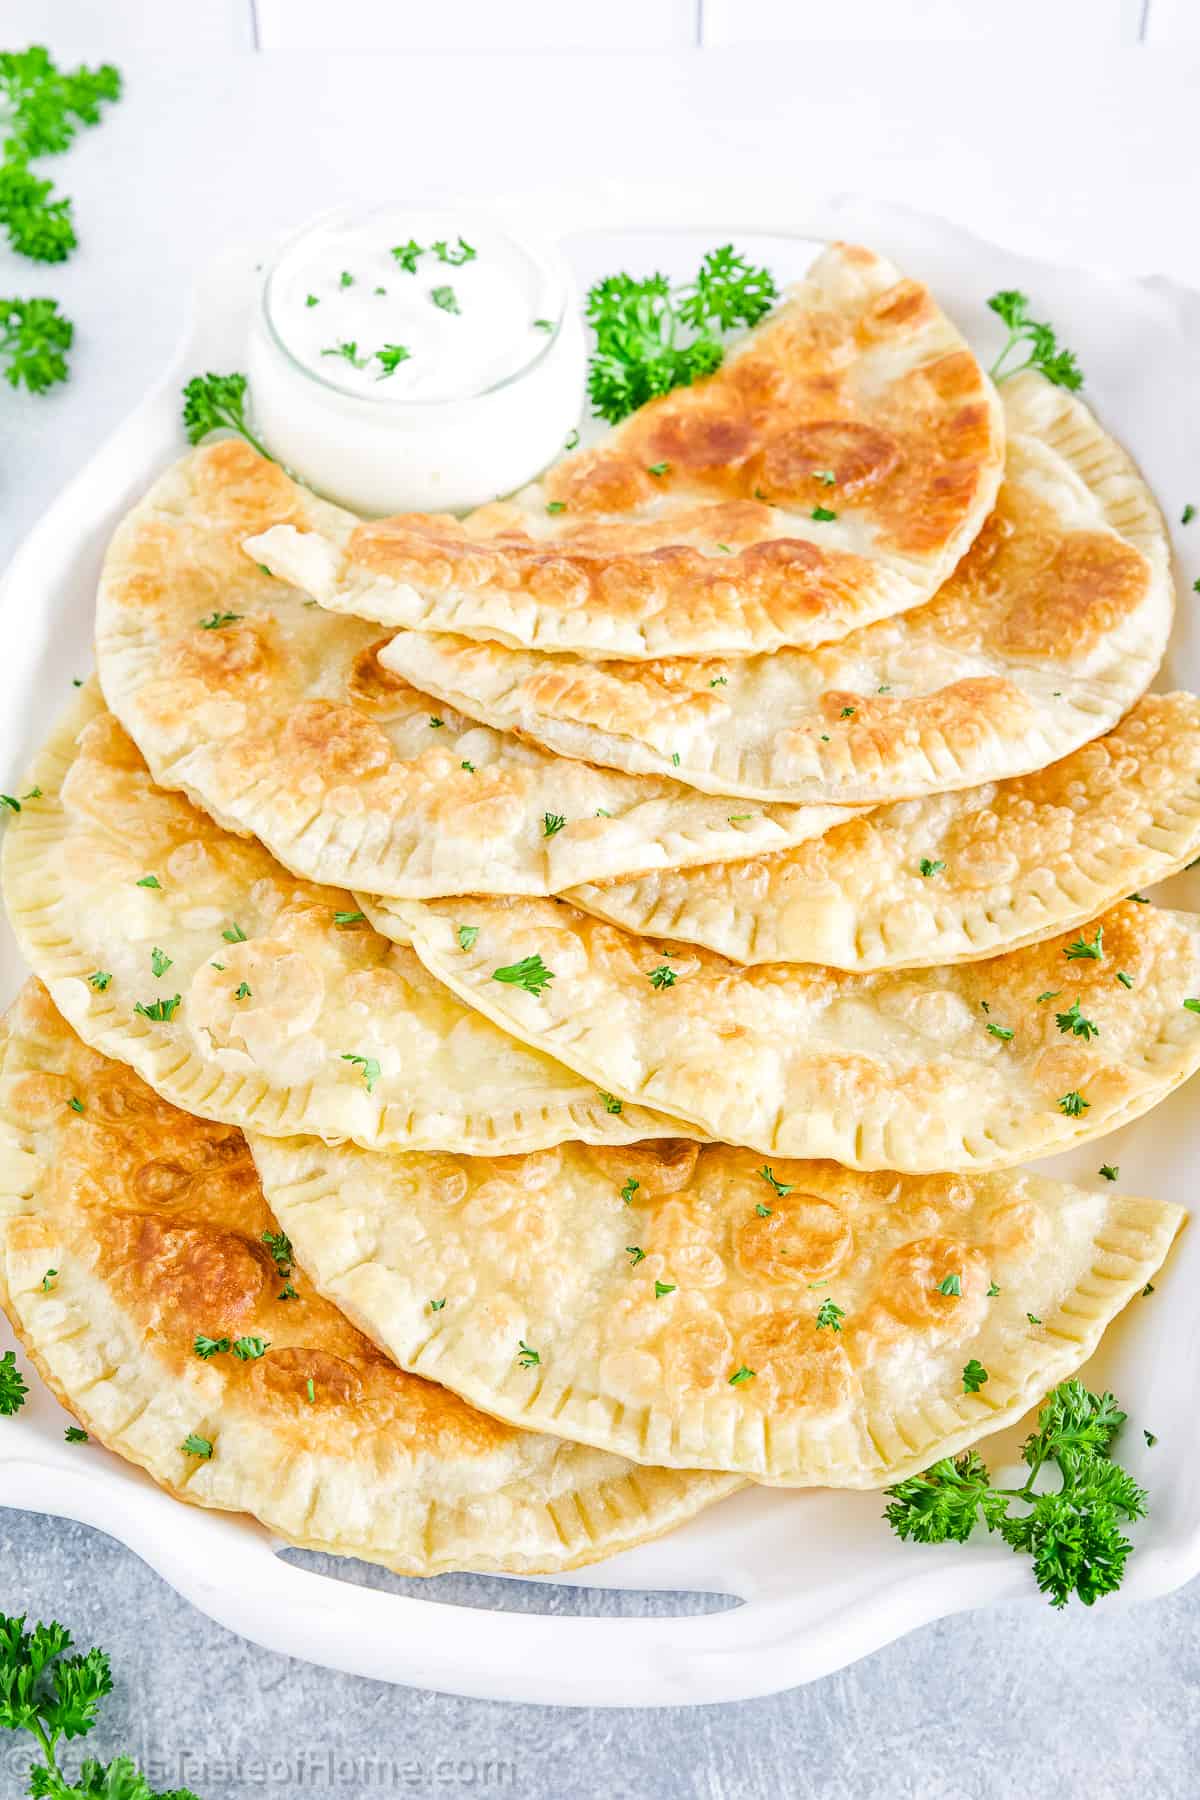 These delicious, savory cheburеki are best served hot, with a side of sour cream. Enjoy the authentic flavors and comforting warmth of this traditional dish.